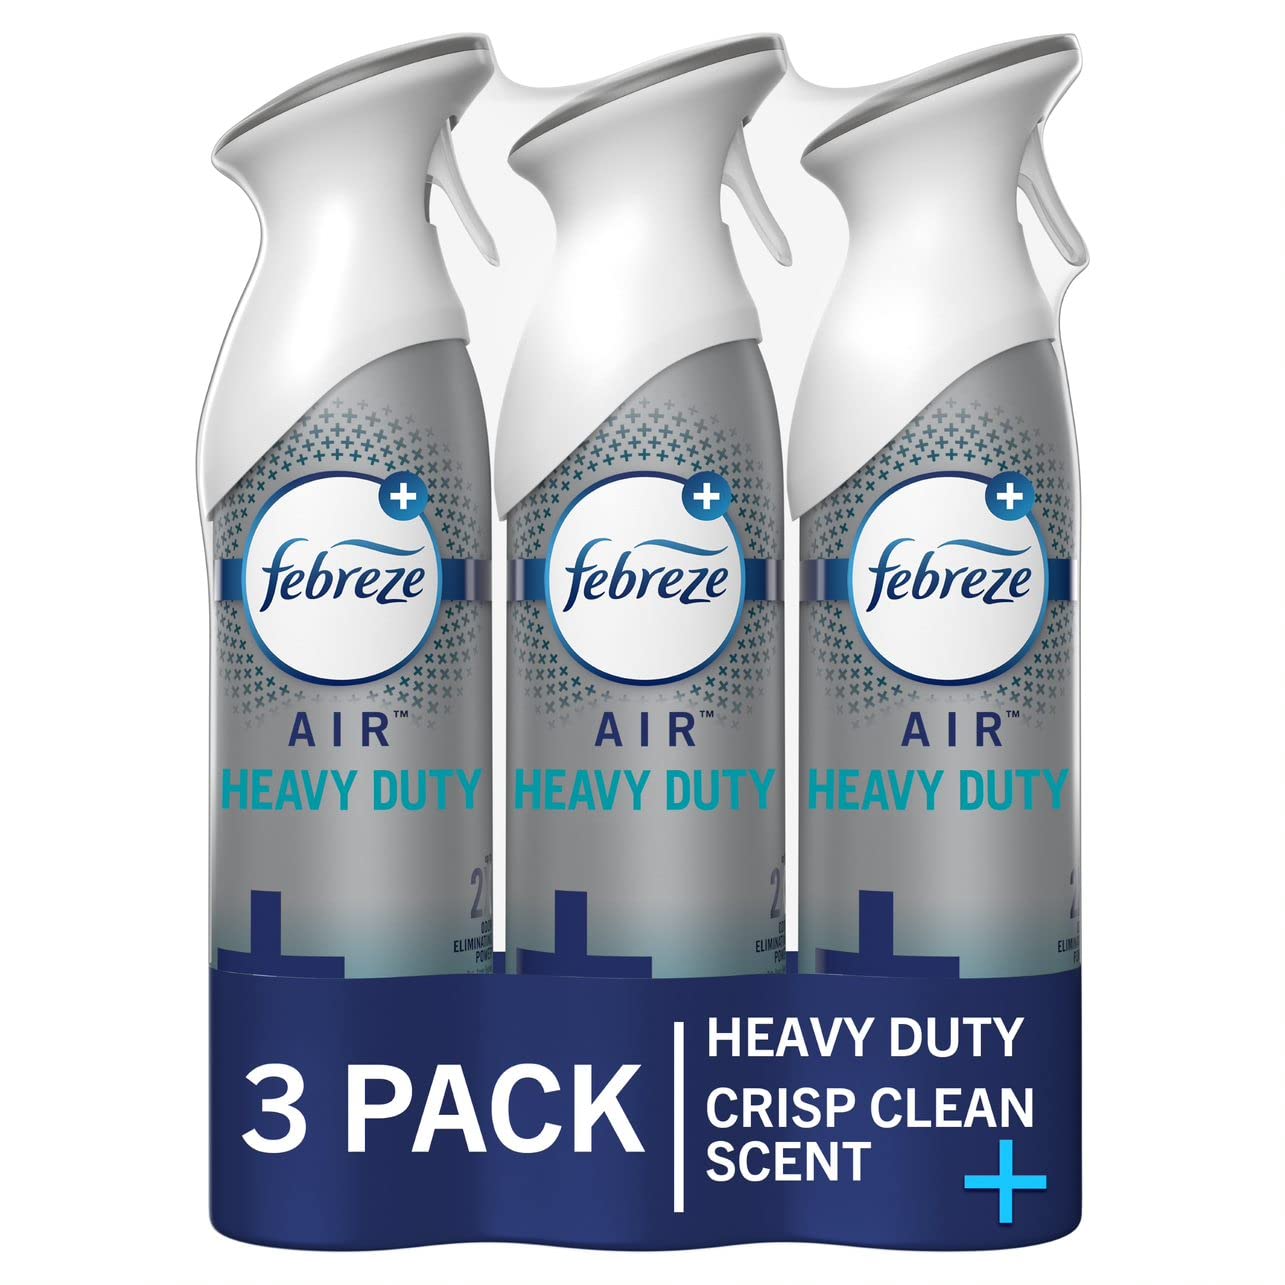 3-Pack 8.8-Oz Febreze Heavy Duty Odor-Fighting Air Freshener (Crisp Clean) $8.40 & More w/ S&S& + Free Shipping w/ Prime or on $35+